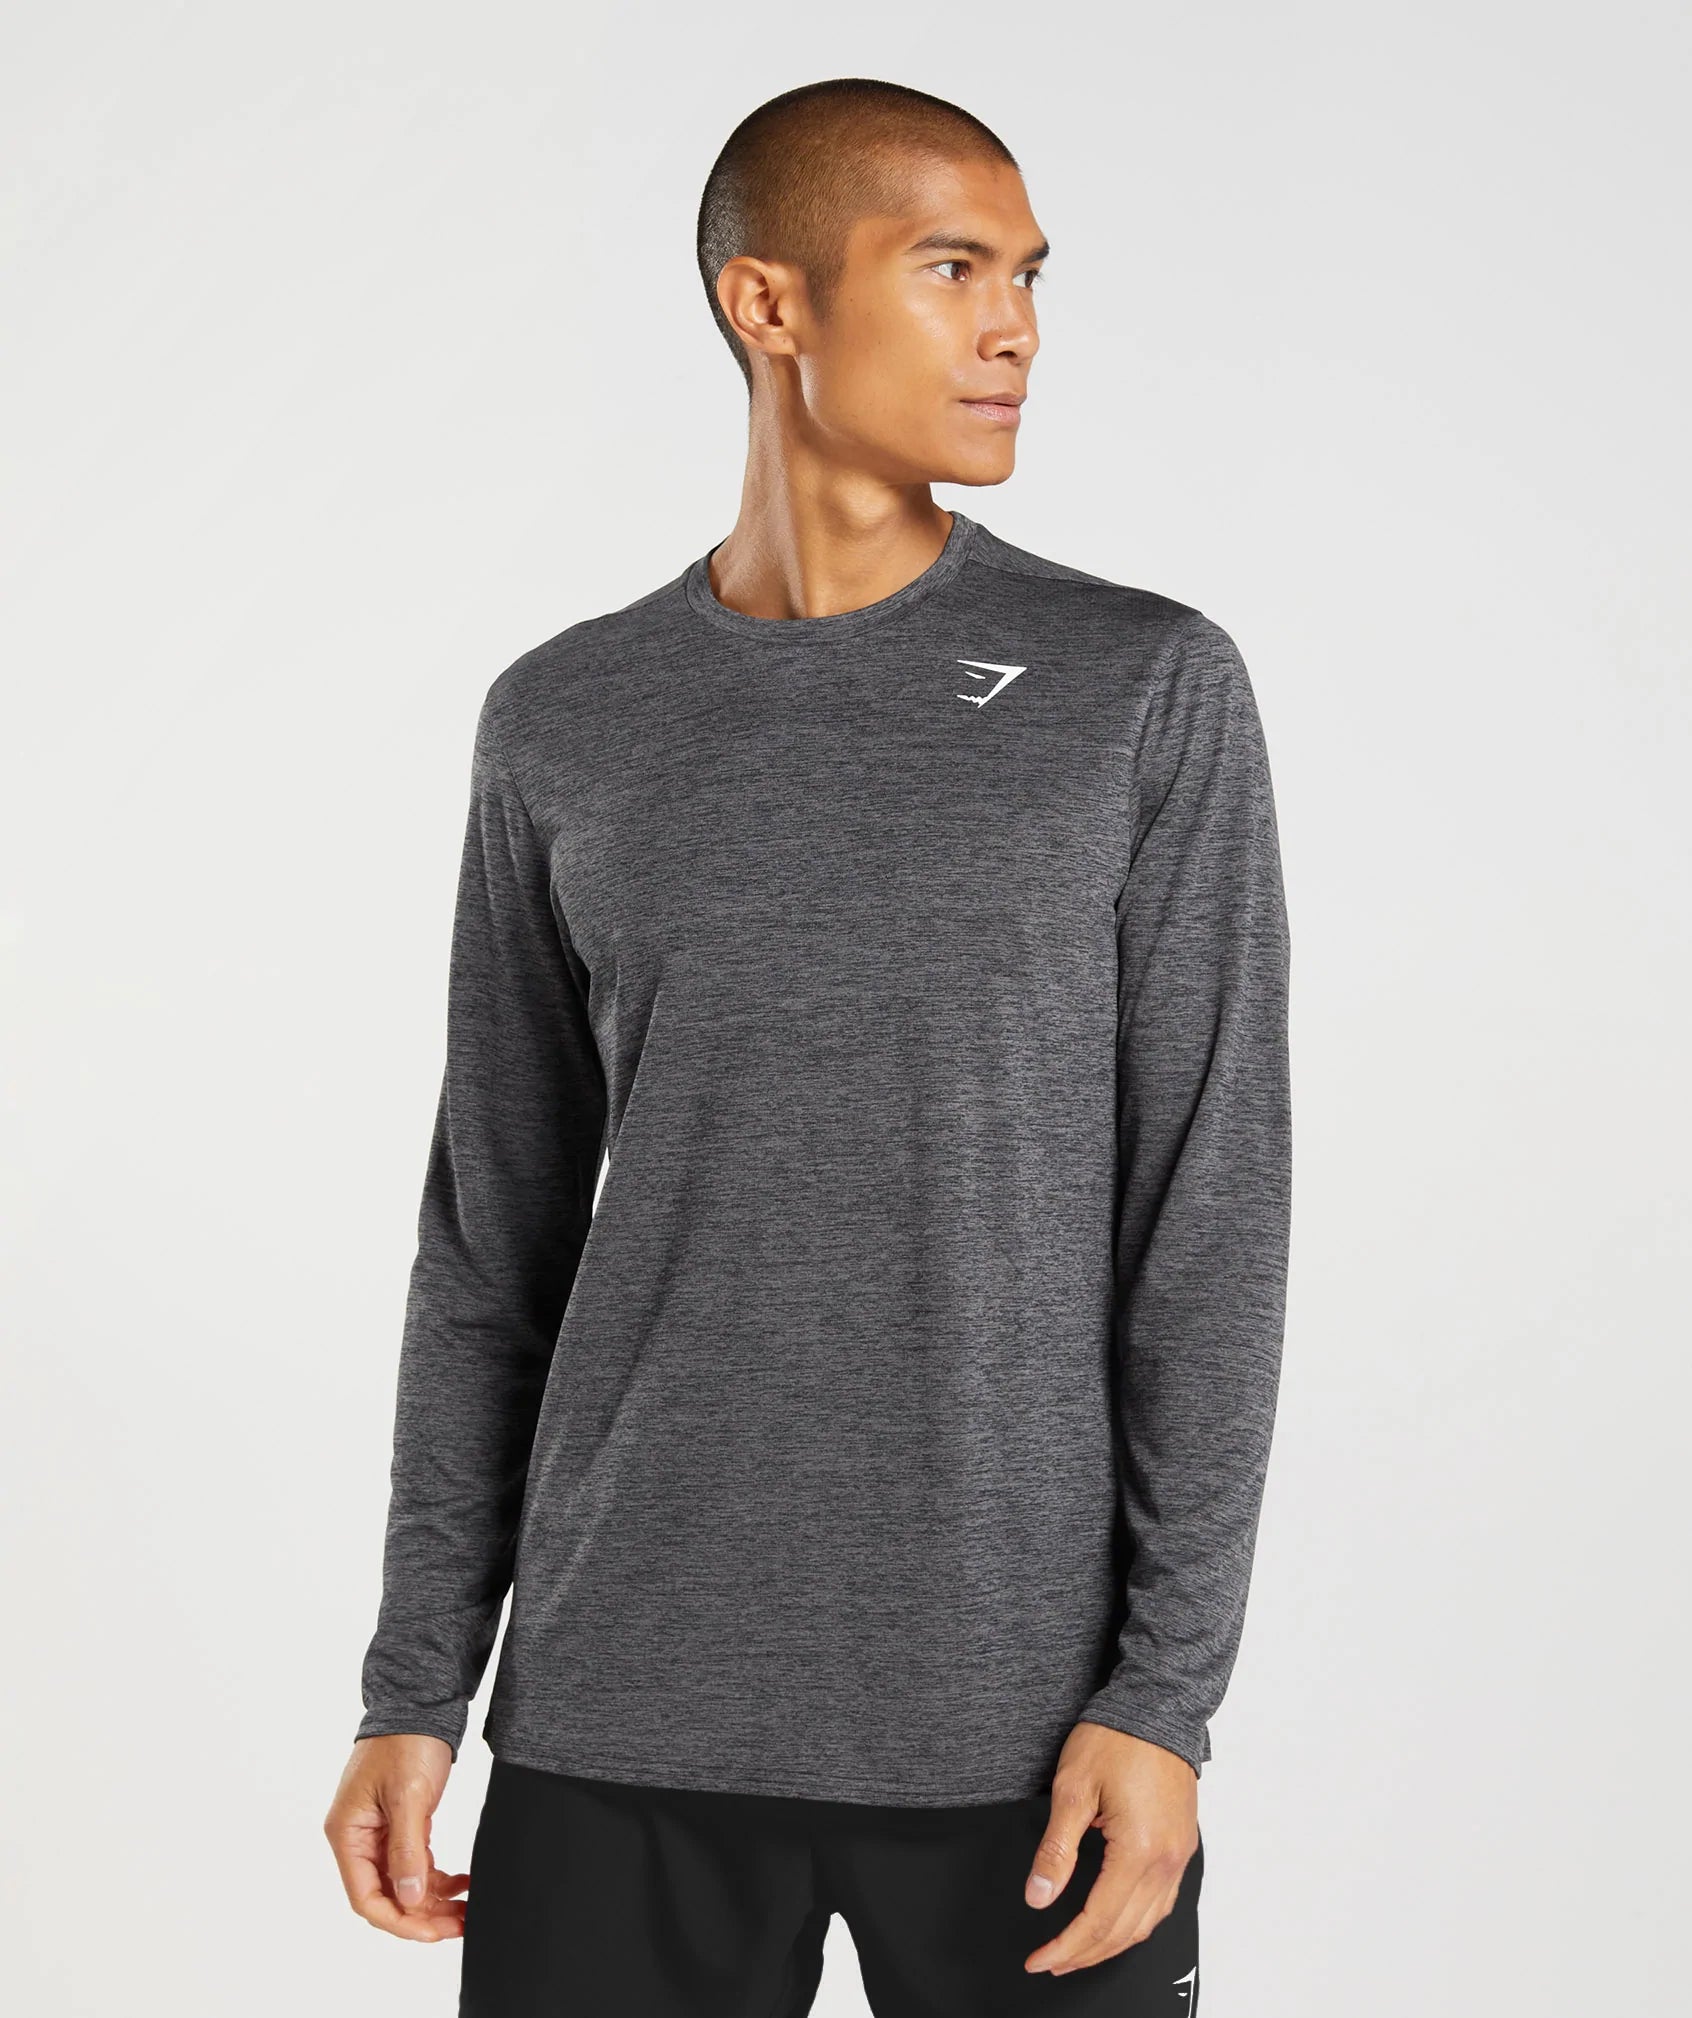 Arrival Long Sleeve T-Shirt in Black/Silhouette Grey Marl - view 1